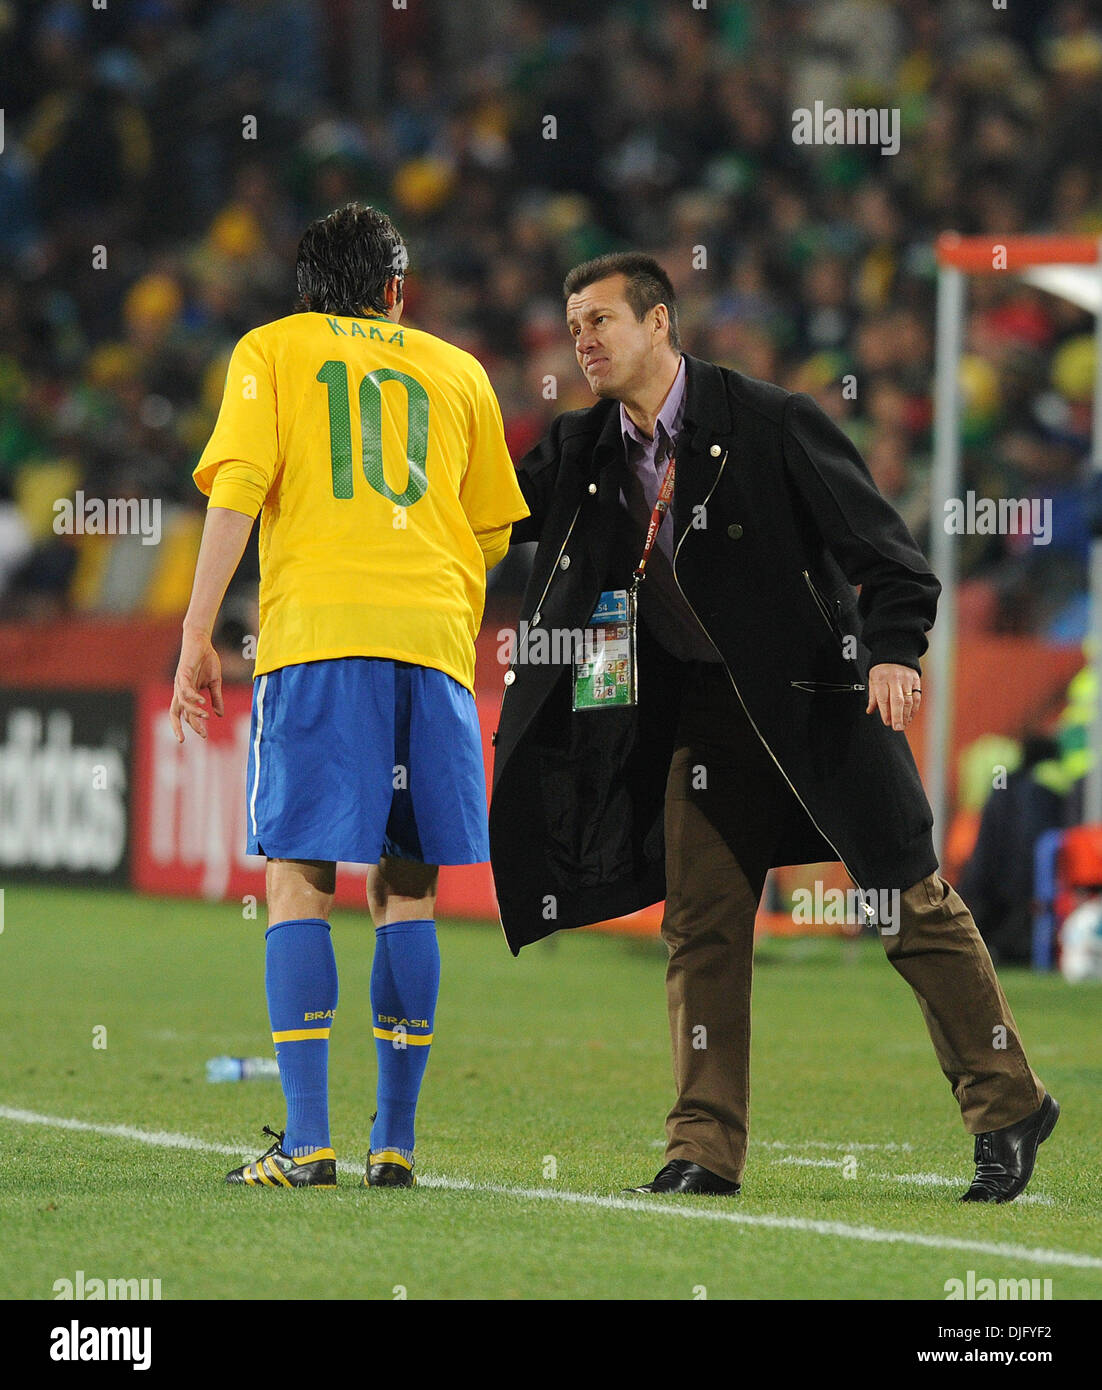 June 28, 2010 - Johannesburg, South Africa - Carlos Dunga, coach of Brazil speaks with Kaka during the 2010 FIFA World Cup soccer match between Brazil and Chile at Ellis Park Stadium on June 28, 2010 in Johannesburg, South Africa. (Credit Image: © Luca Ghidoni/ZUMApress.com) Stock Photo